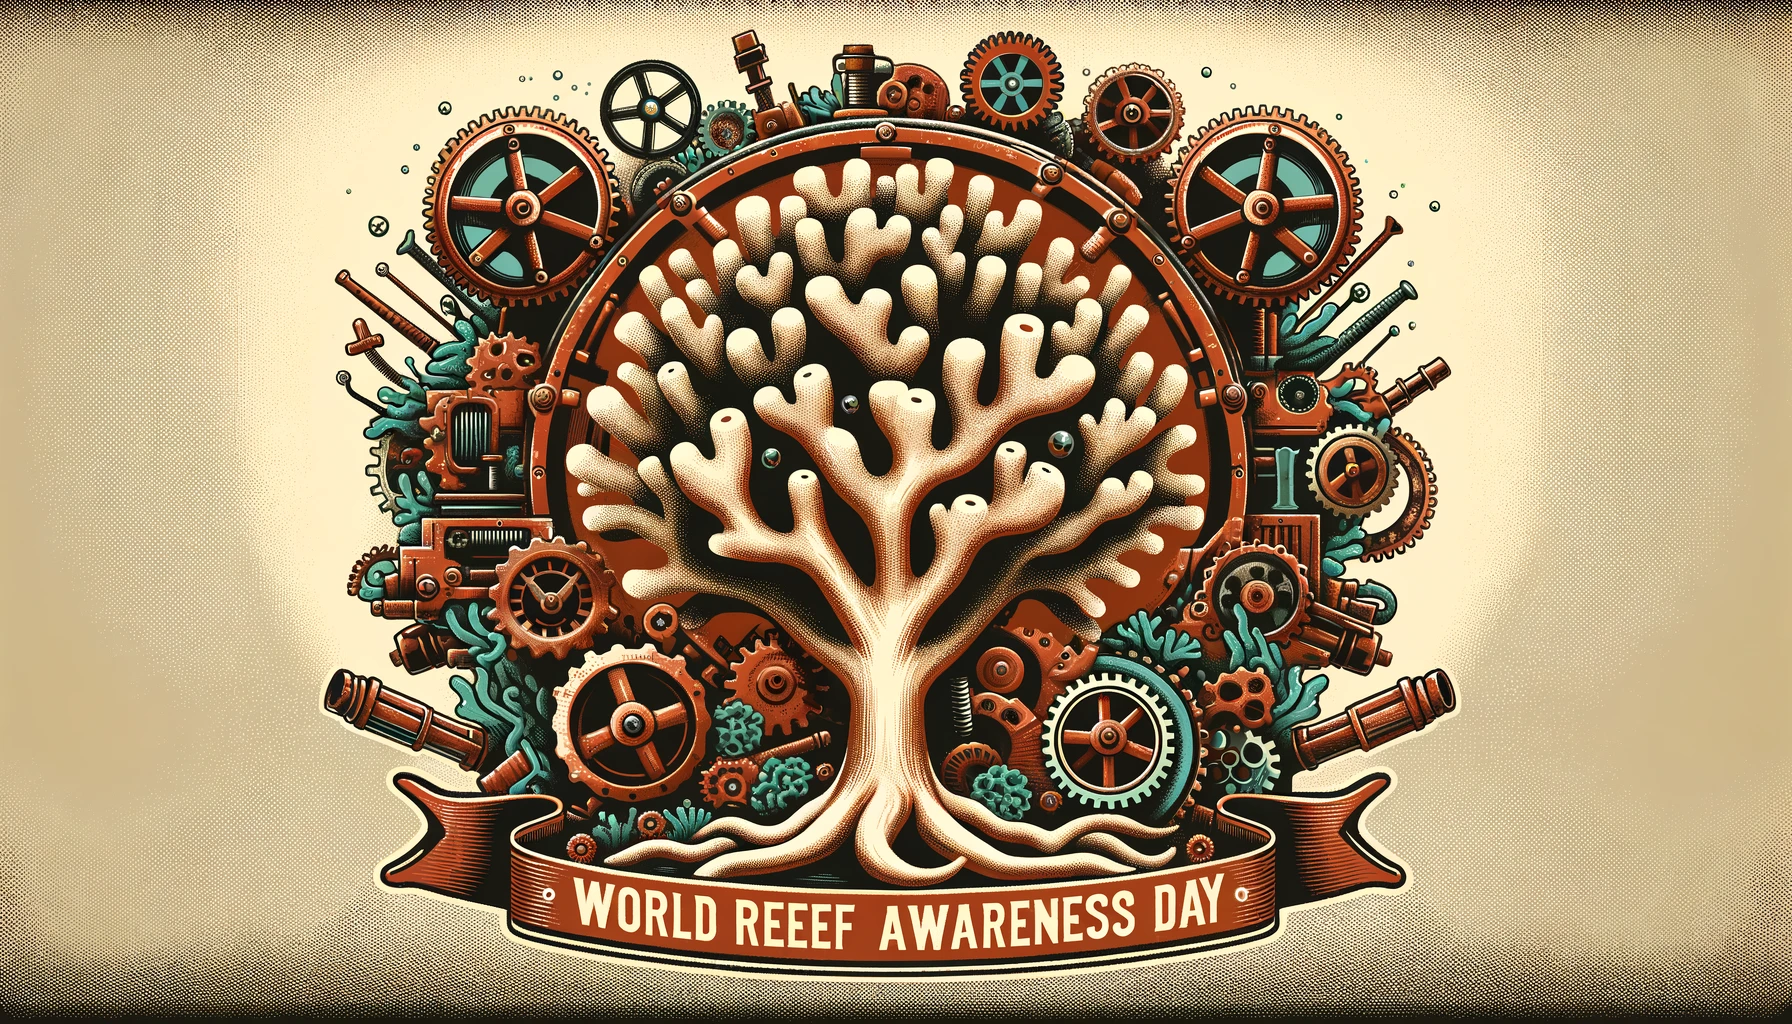 Supportive World Reef Day Messages for Eco-Friendly Actions